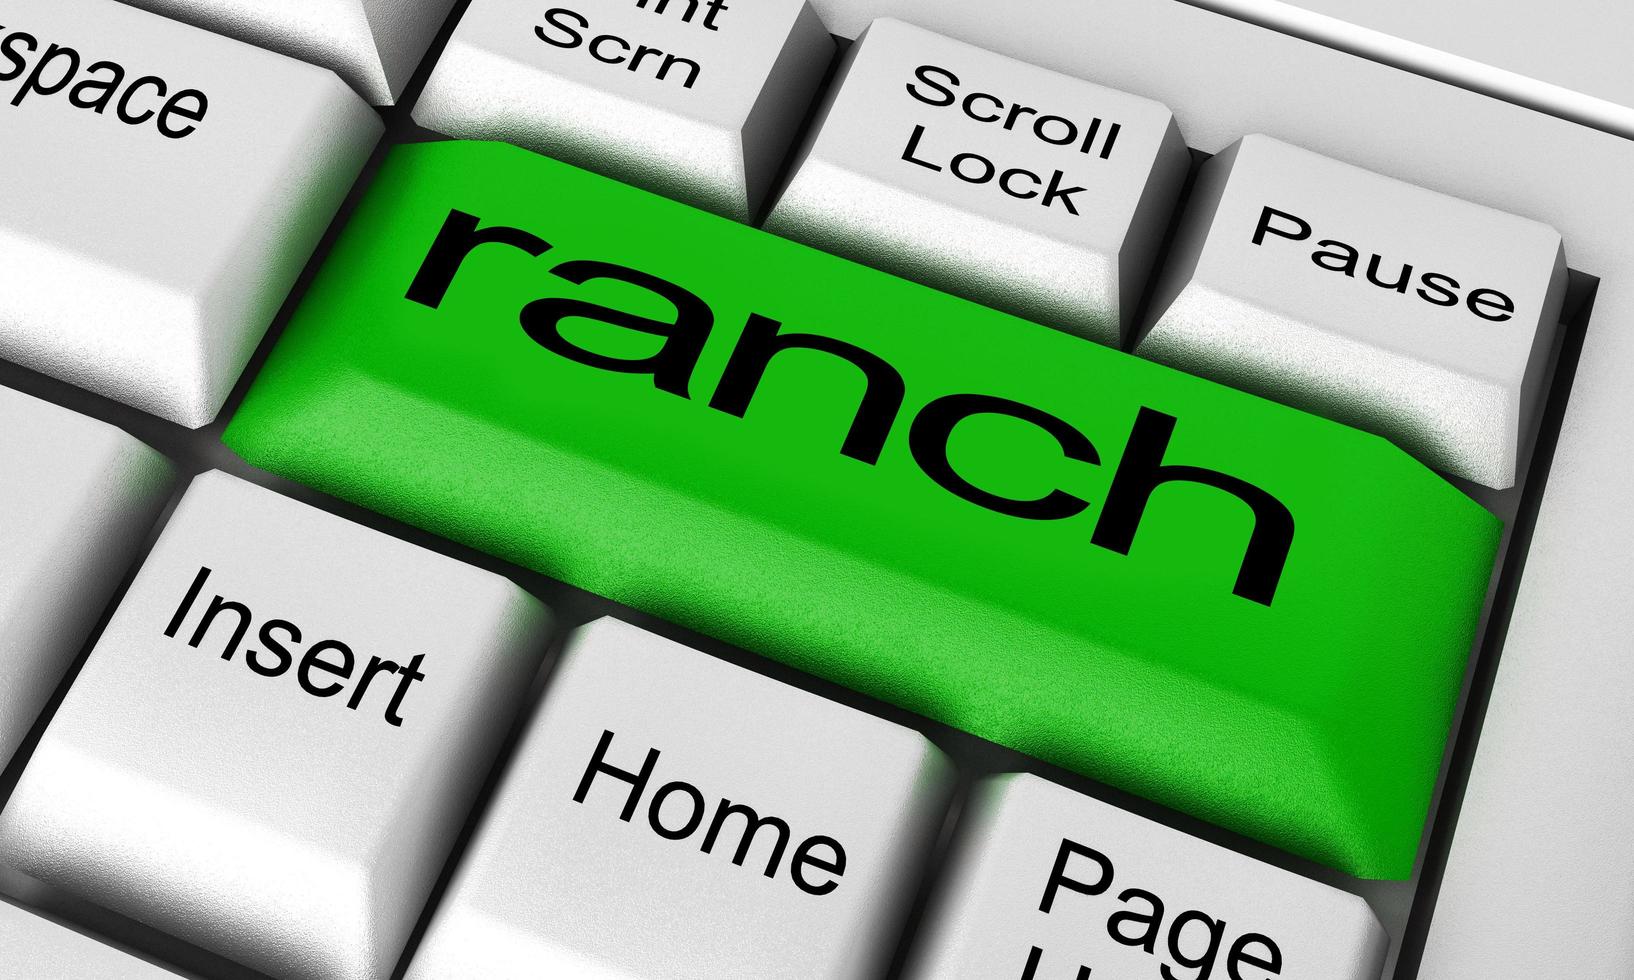 ranch word on keyboard button photo